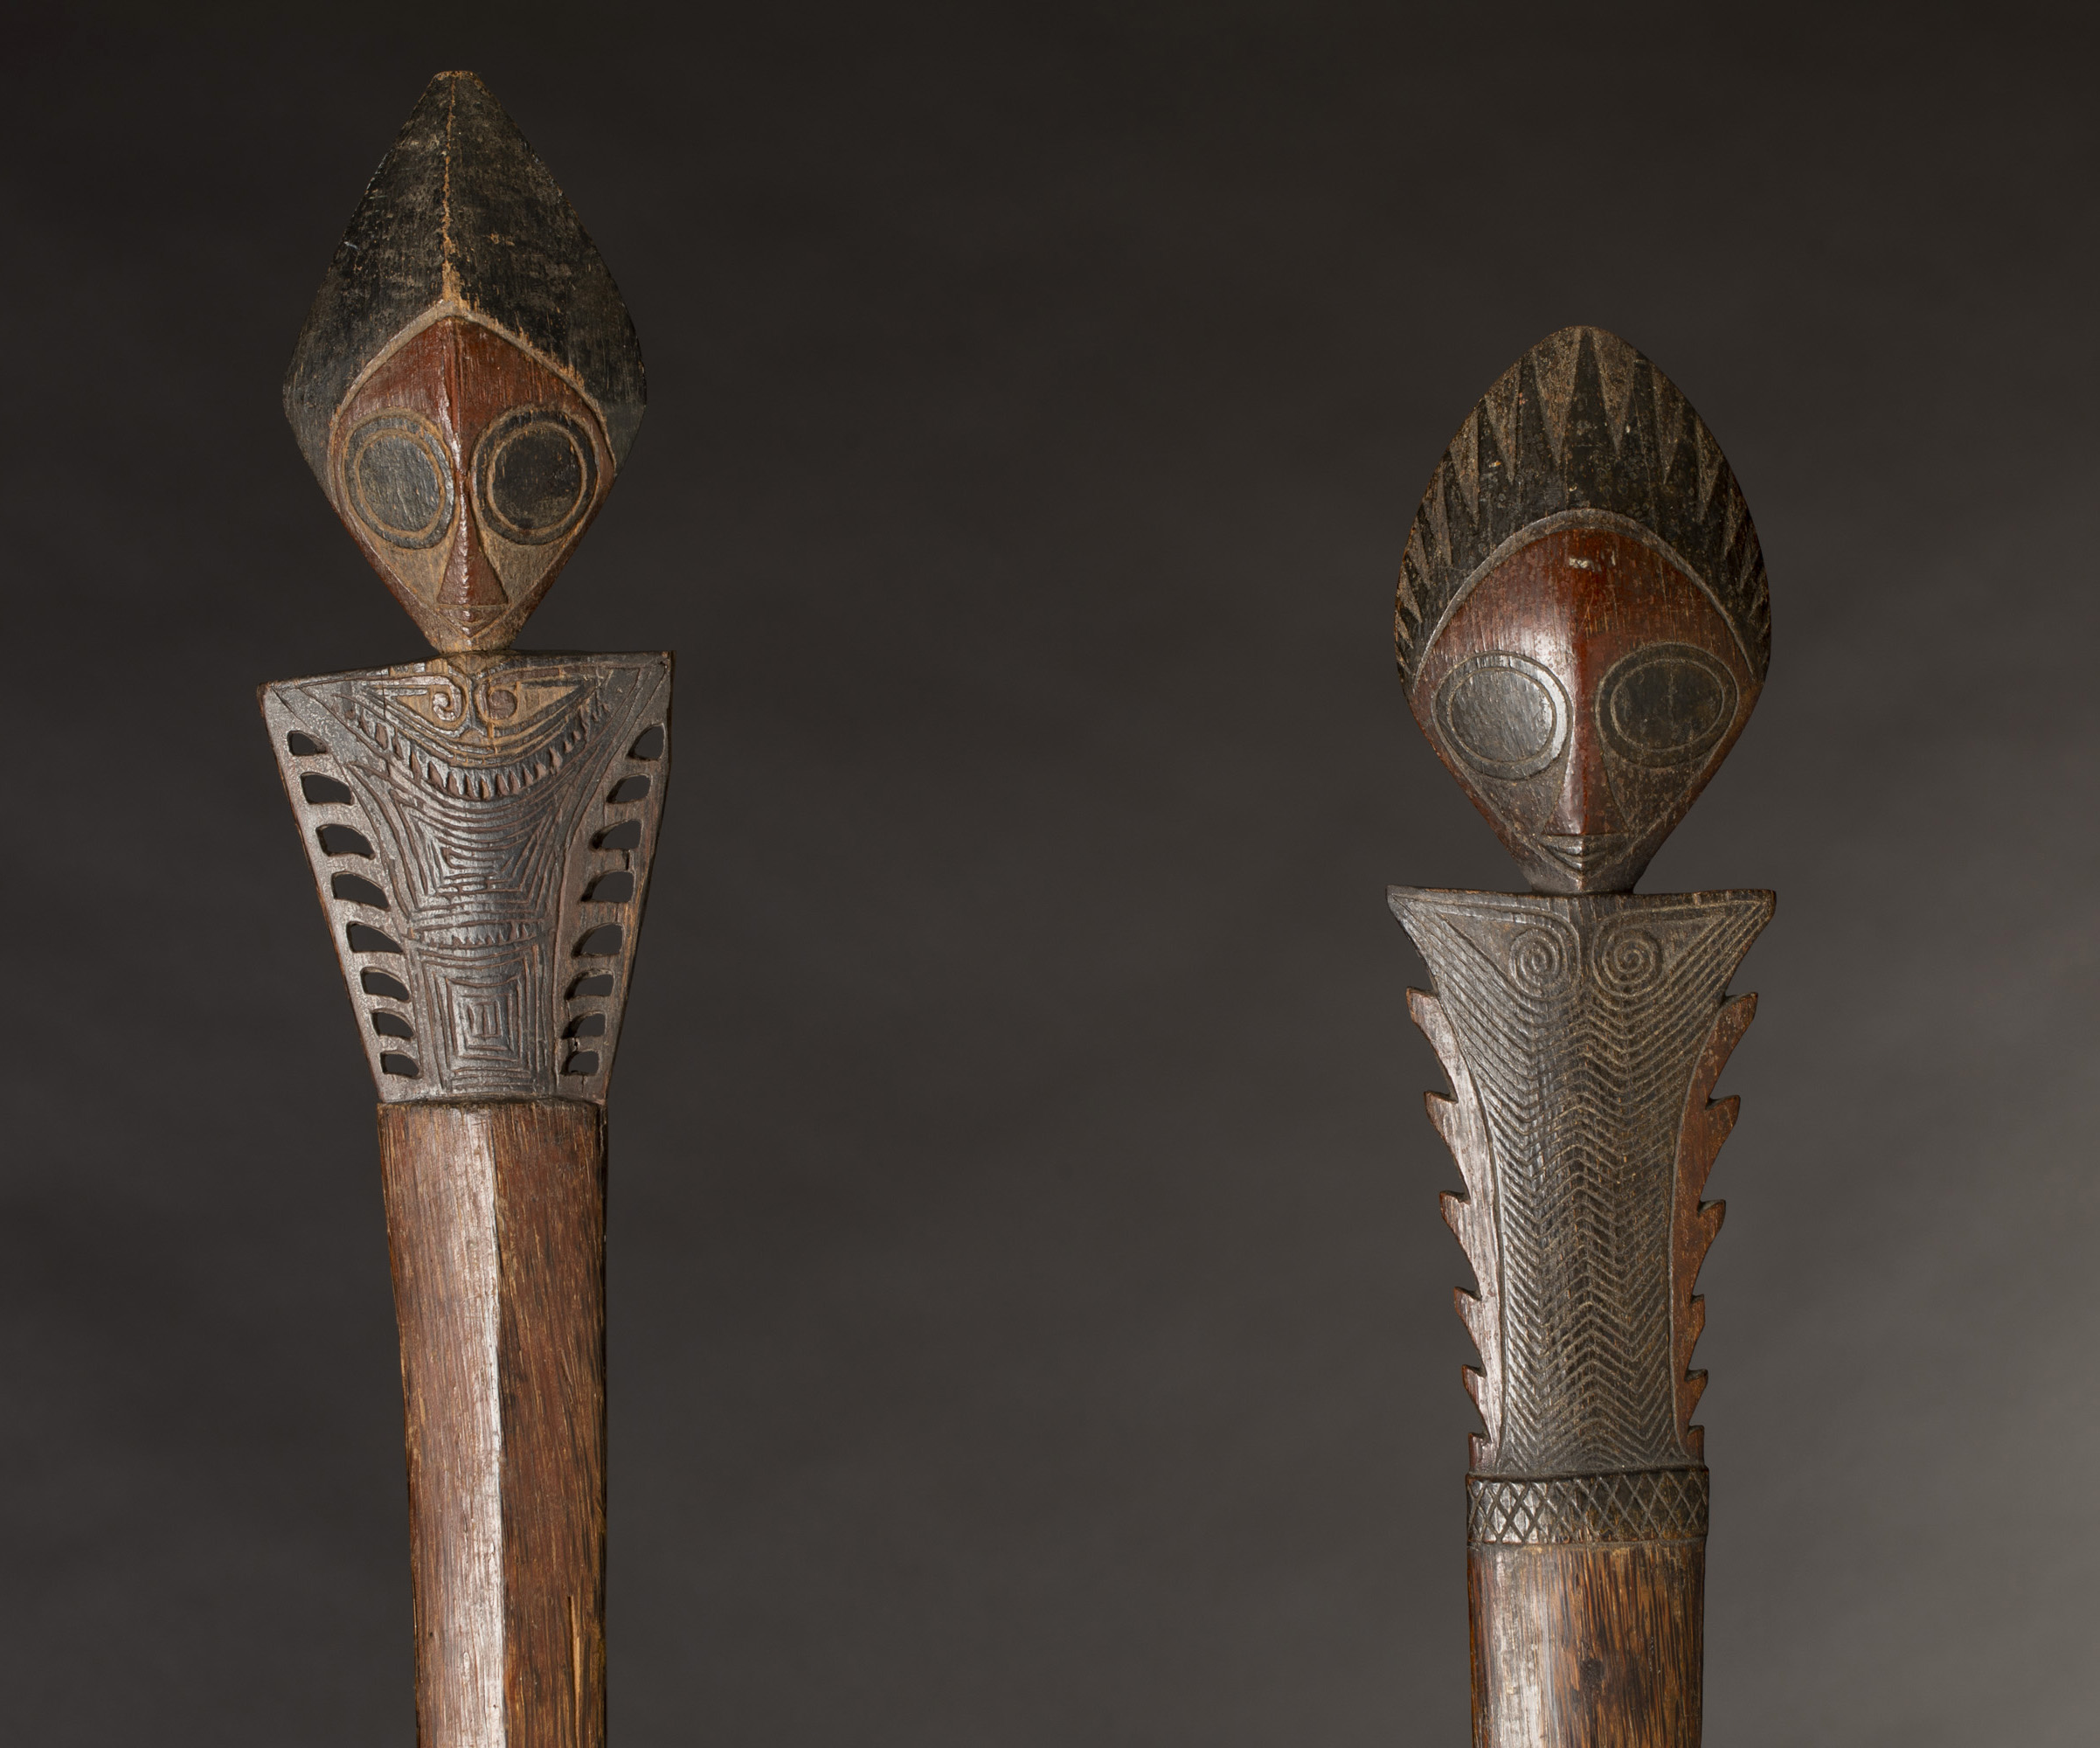 A Superb Old Pair of Dance Clubs Bougainville Island Papua New Guinea 19th C